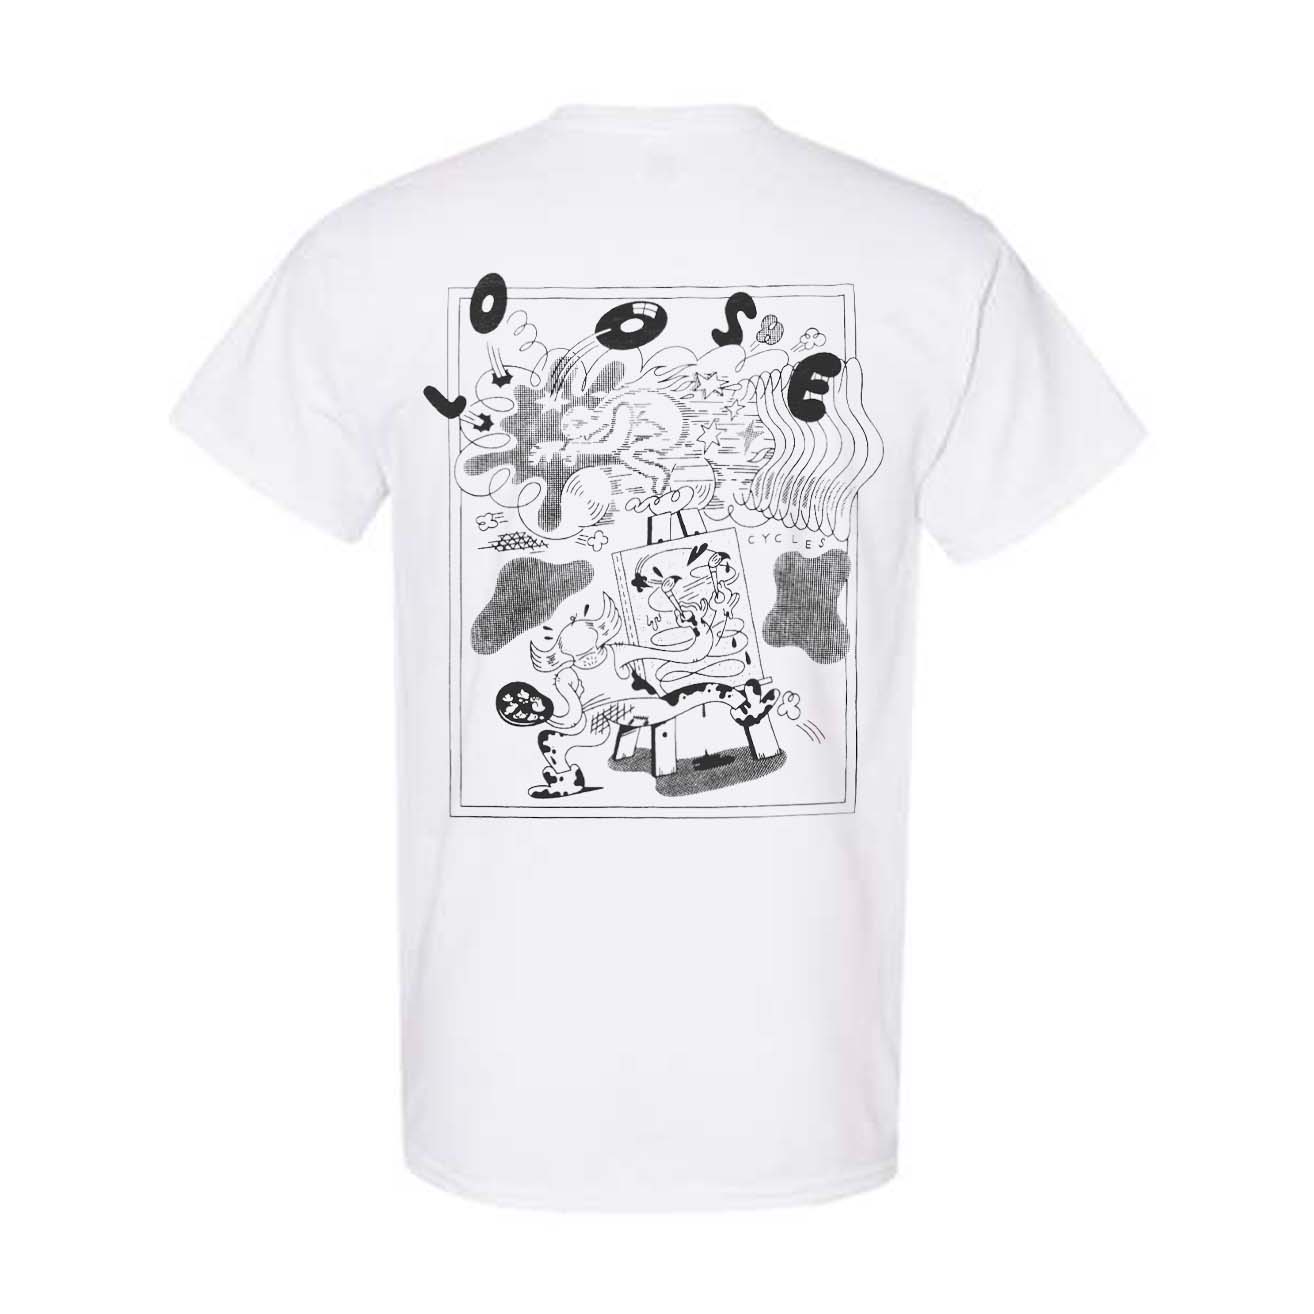 Loose Cycles - Action Painting T-Shirt